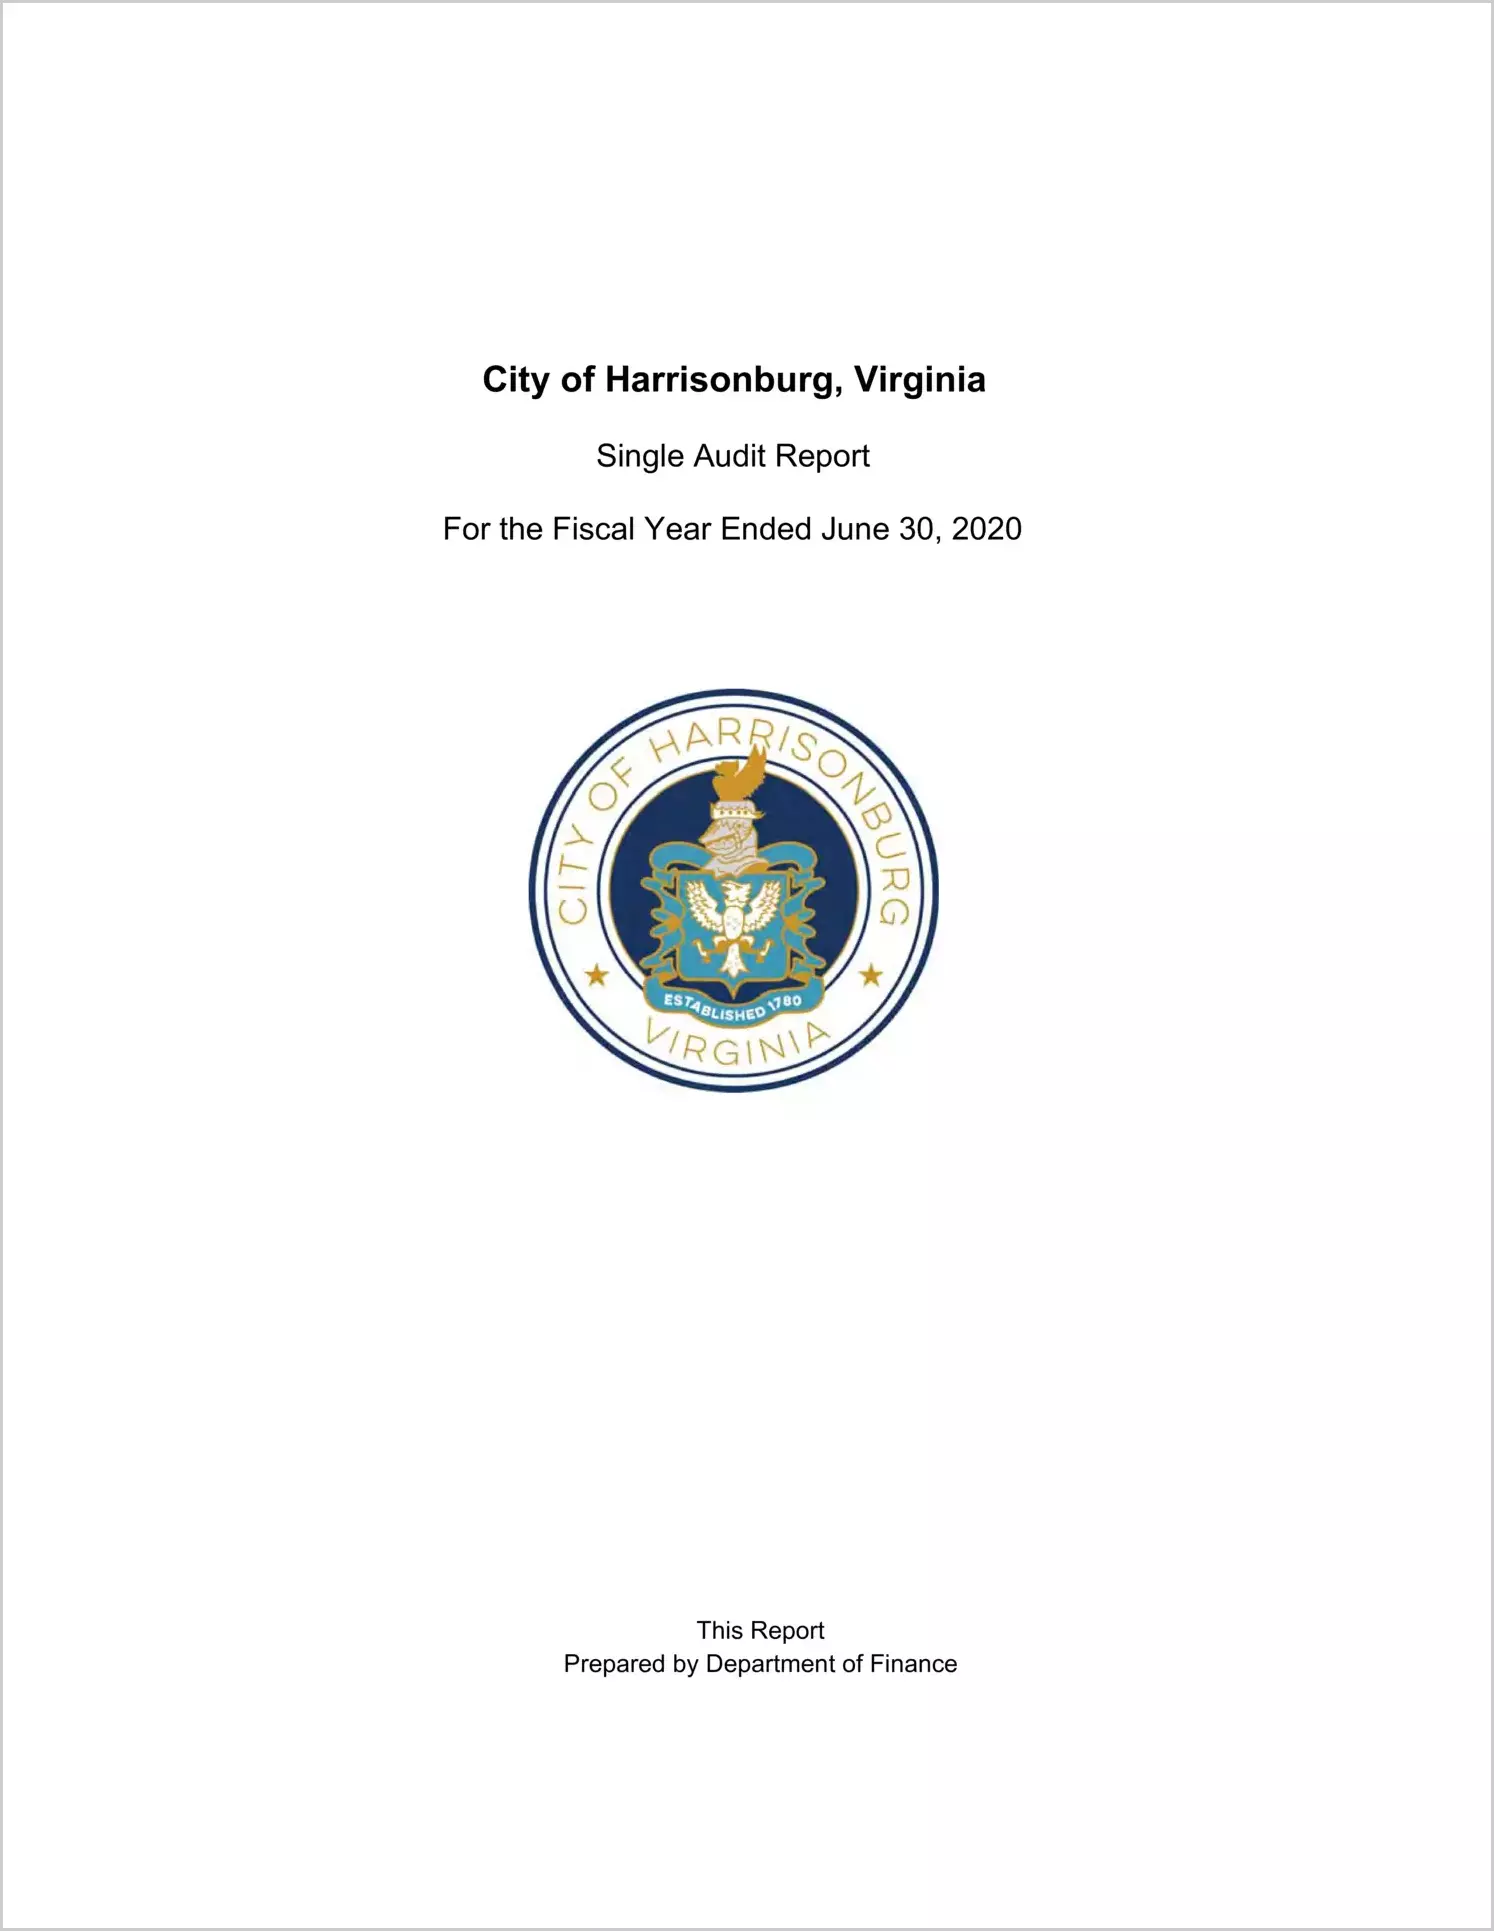 2020 Internal Control and Compliance Report for City of Harrisonburg